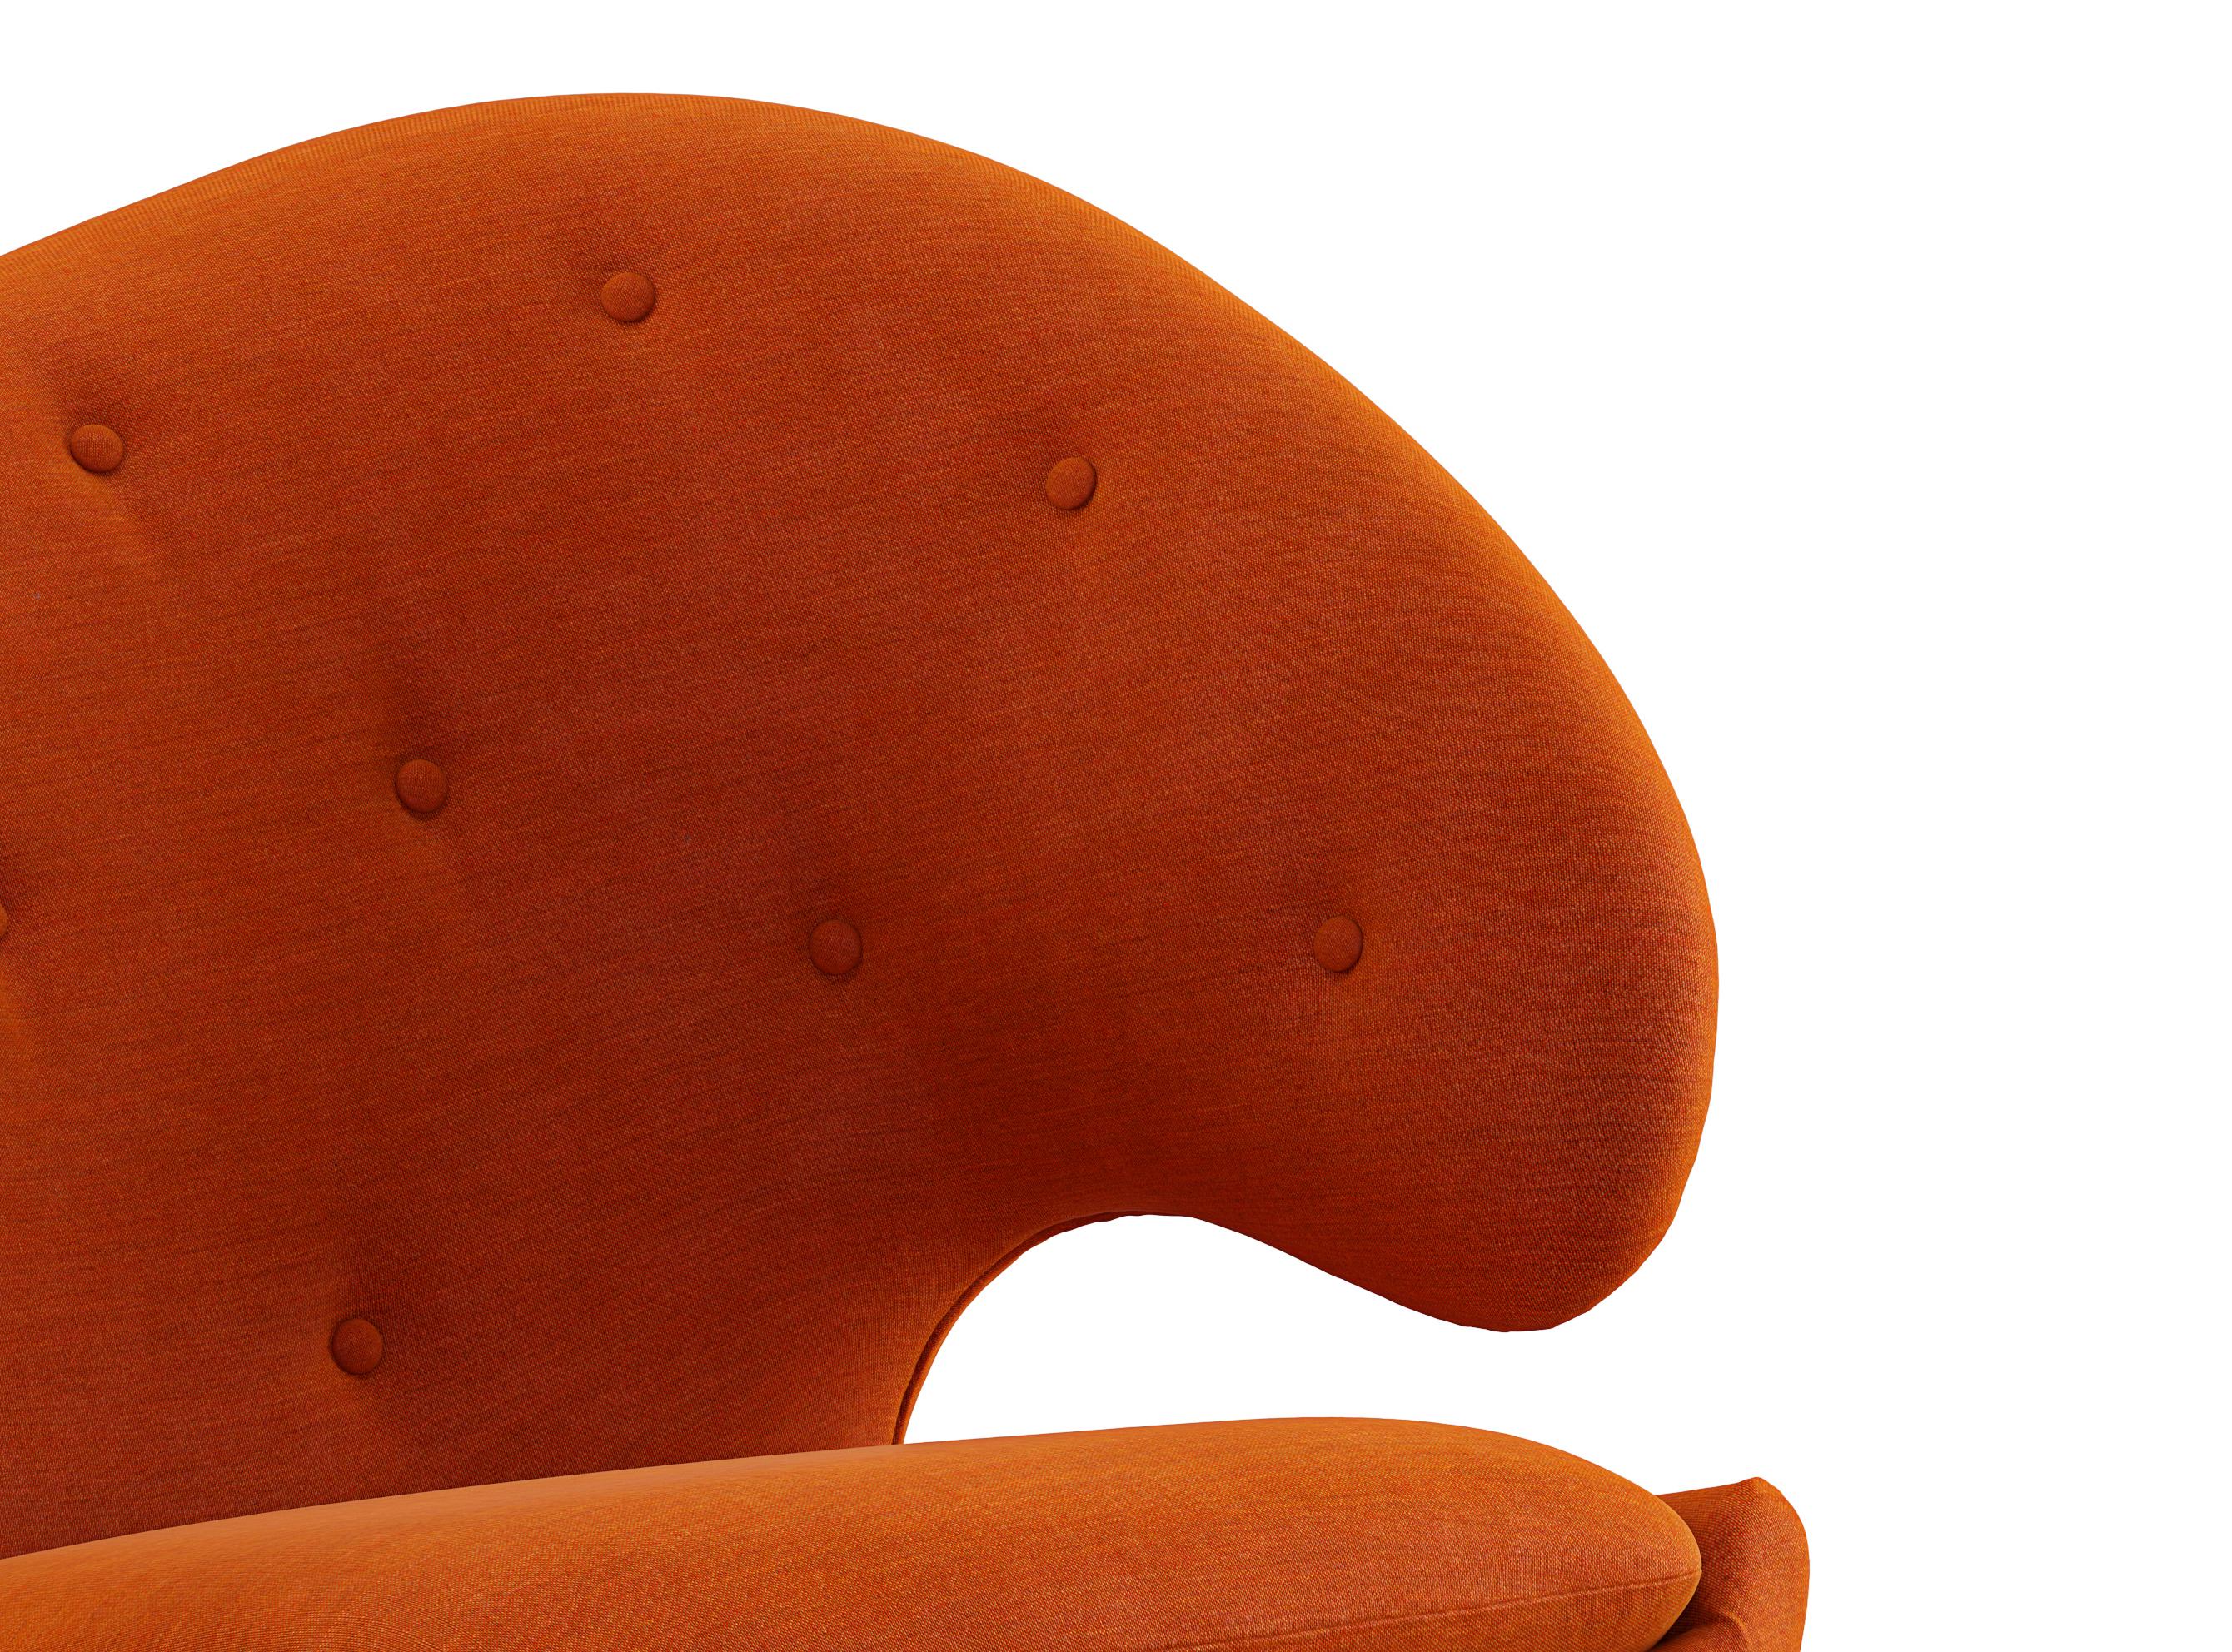 Finn Juhl Pelican Chair Upholstered in Wood and Fabric 1